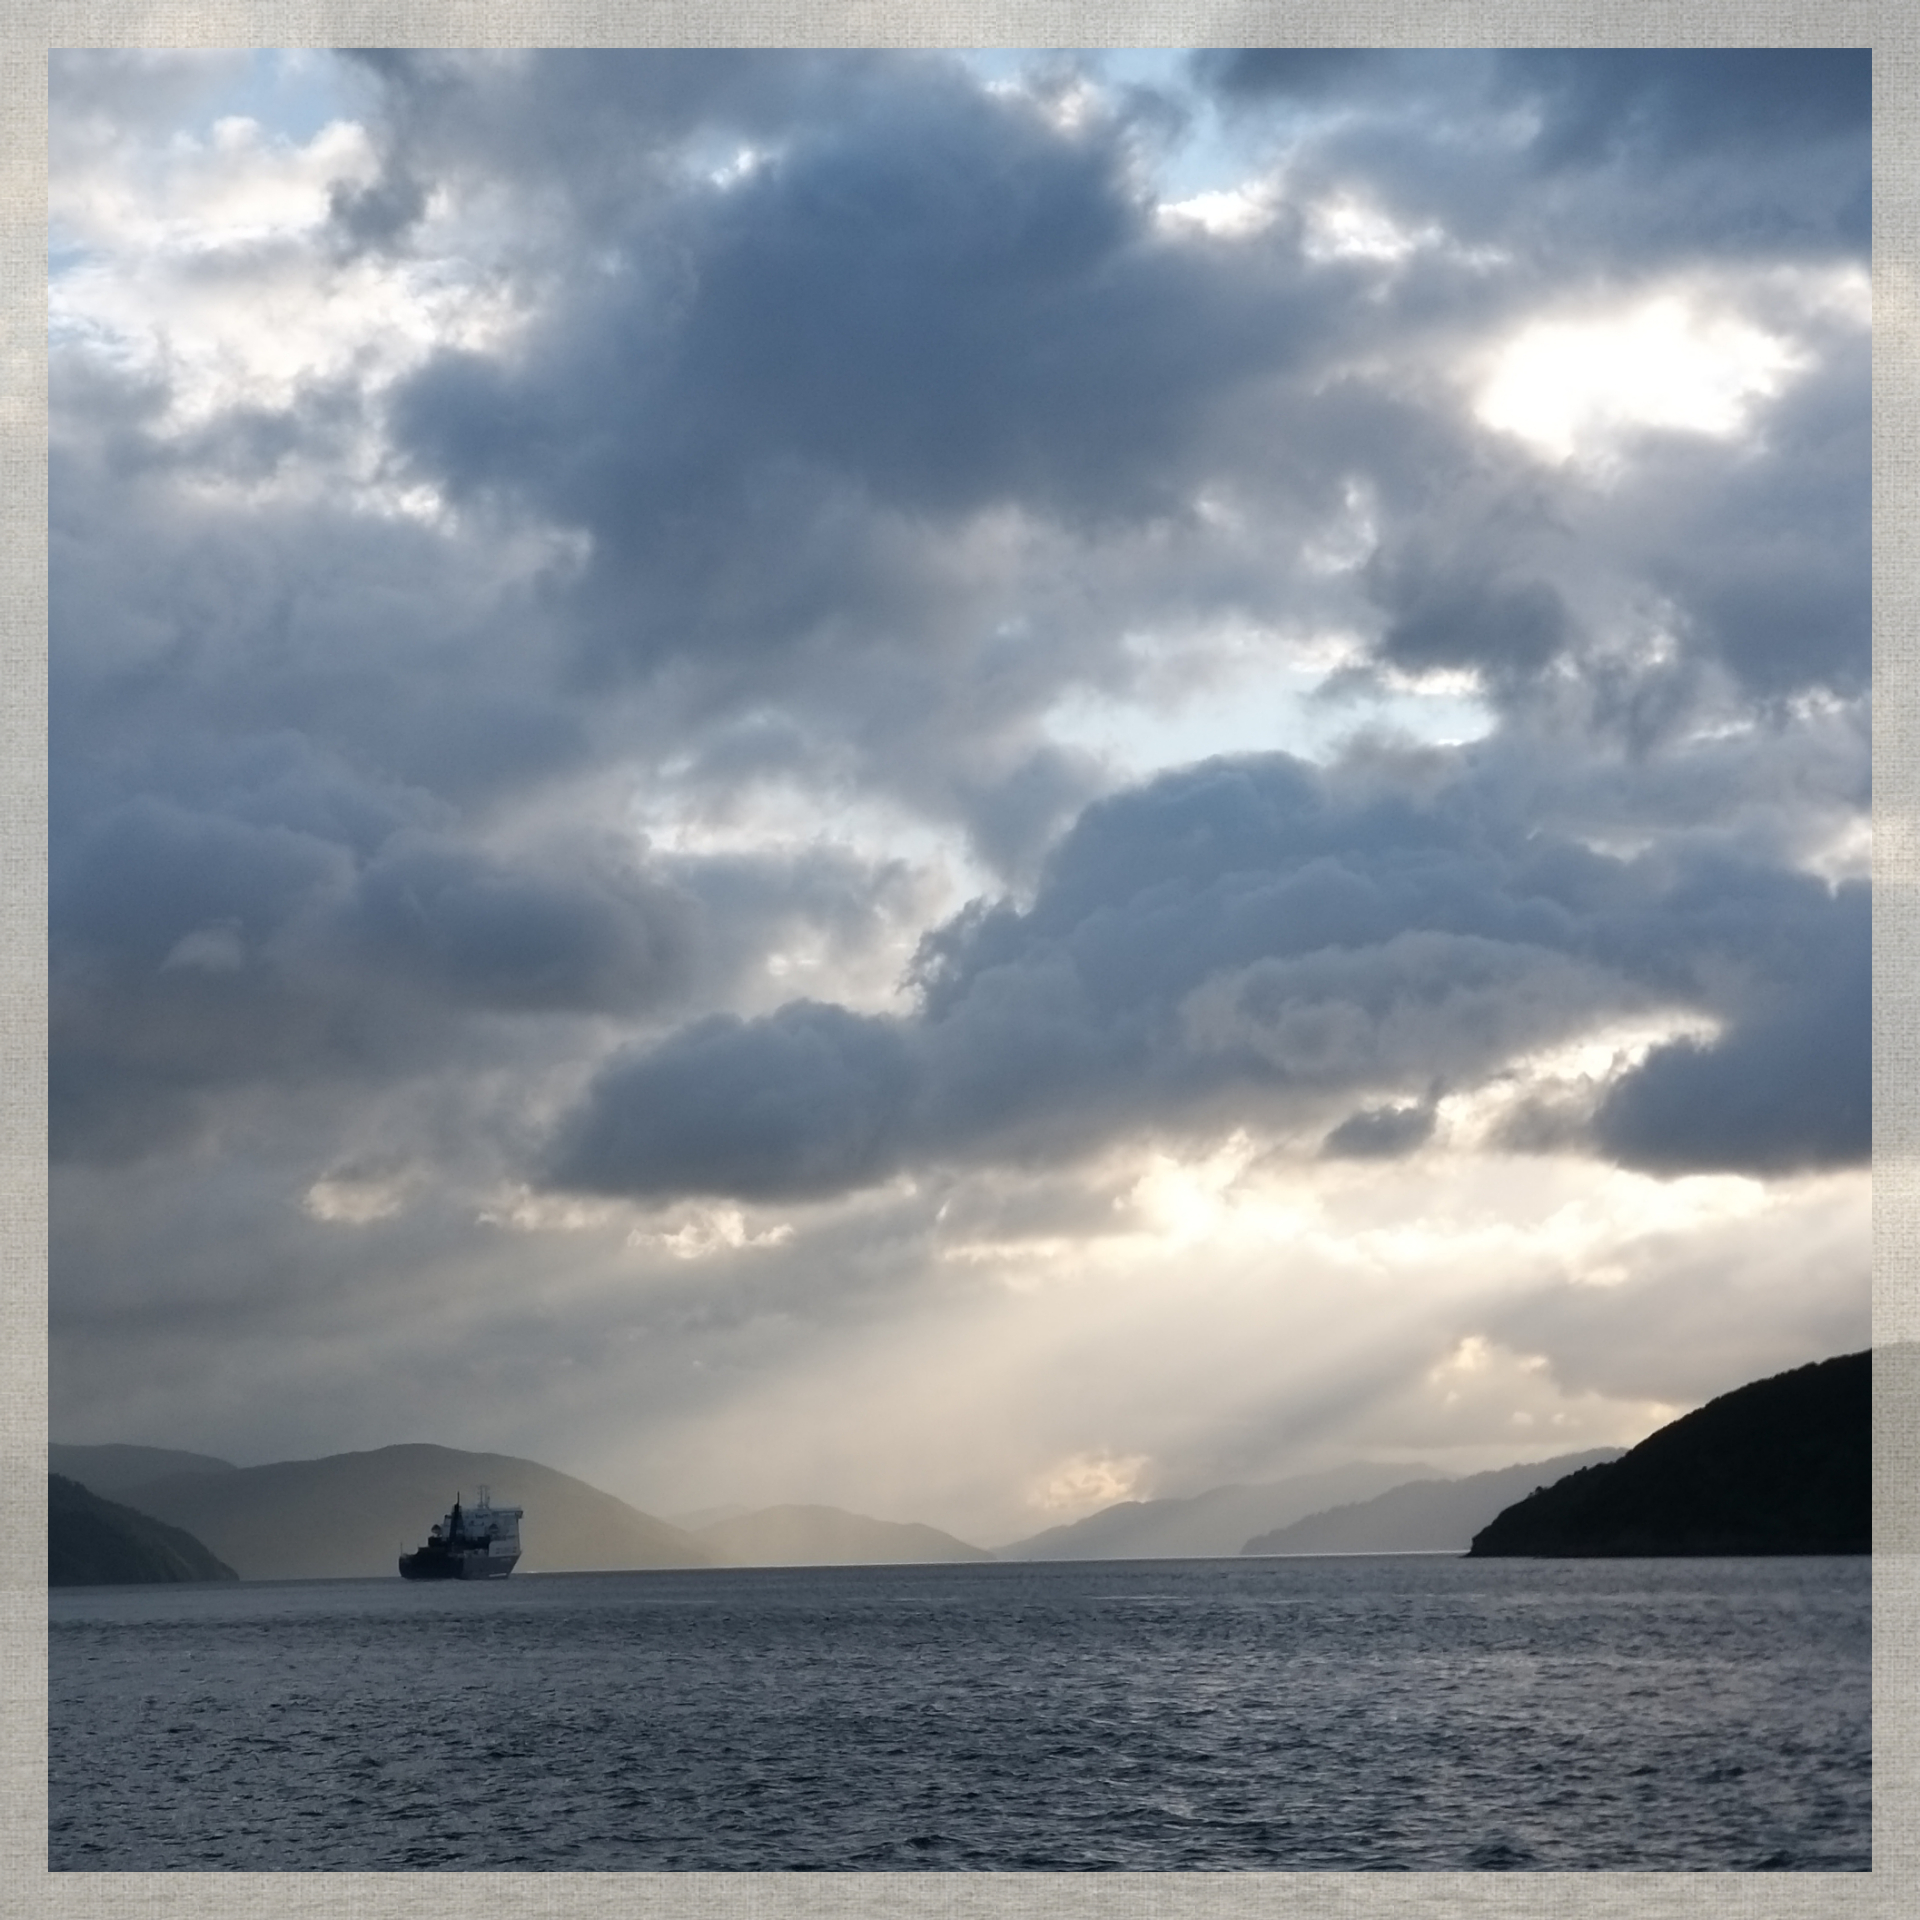 Picton – Queen Charlotte Sounds